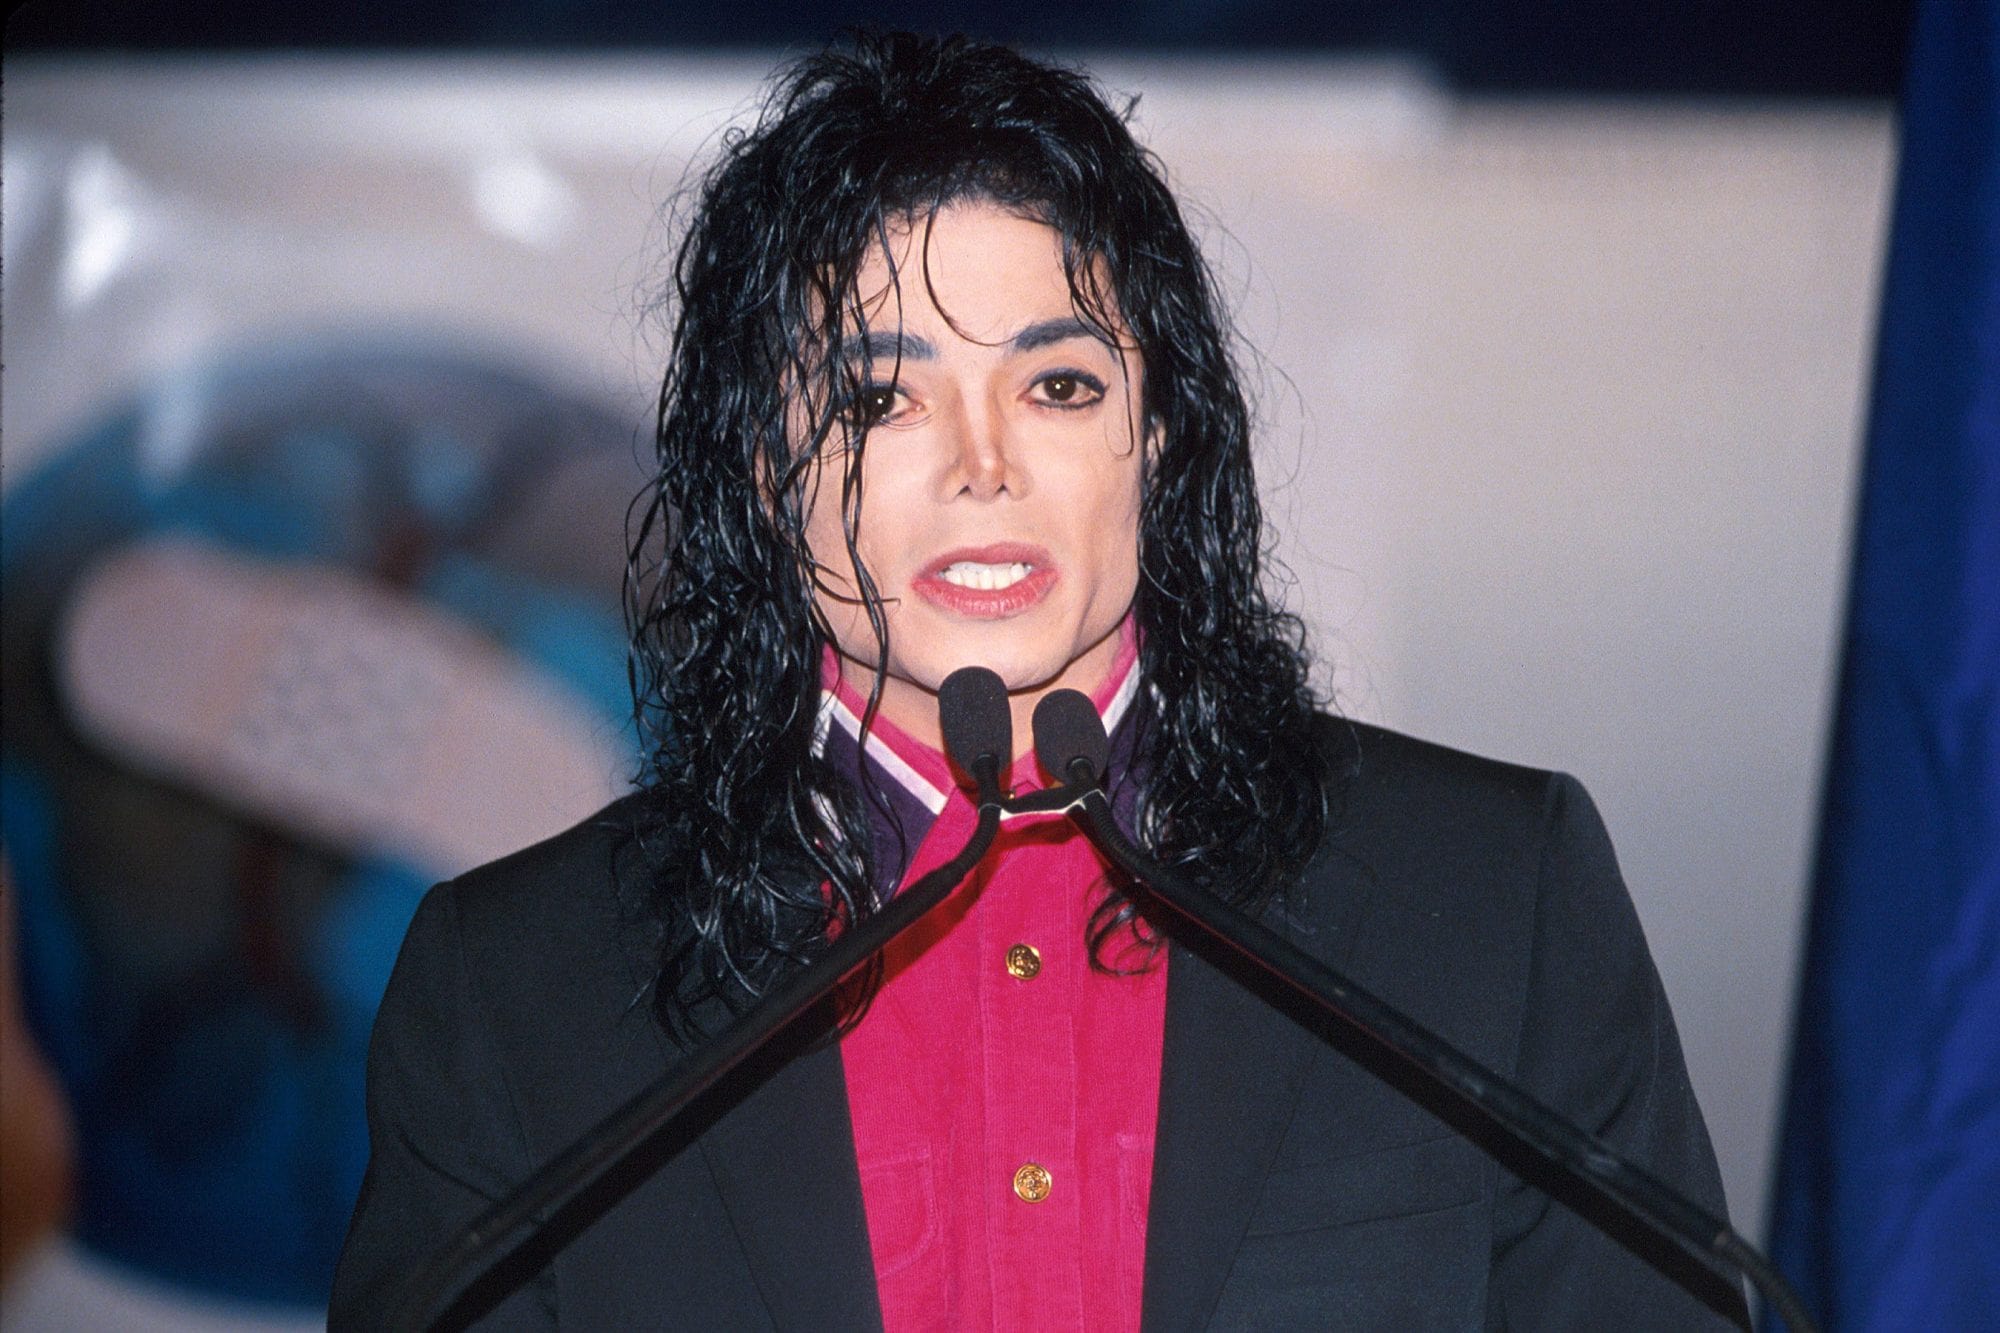 Michael Jackson Net Worth, Source, Property, Car Collection And